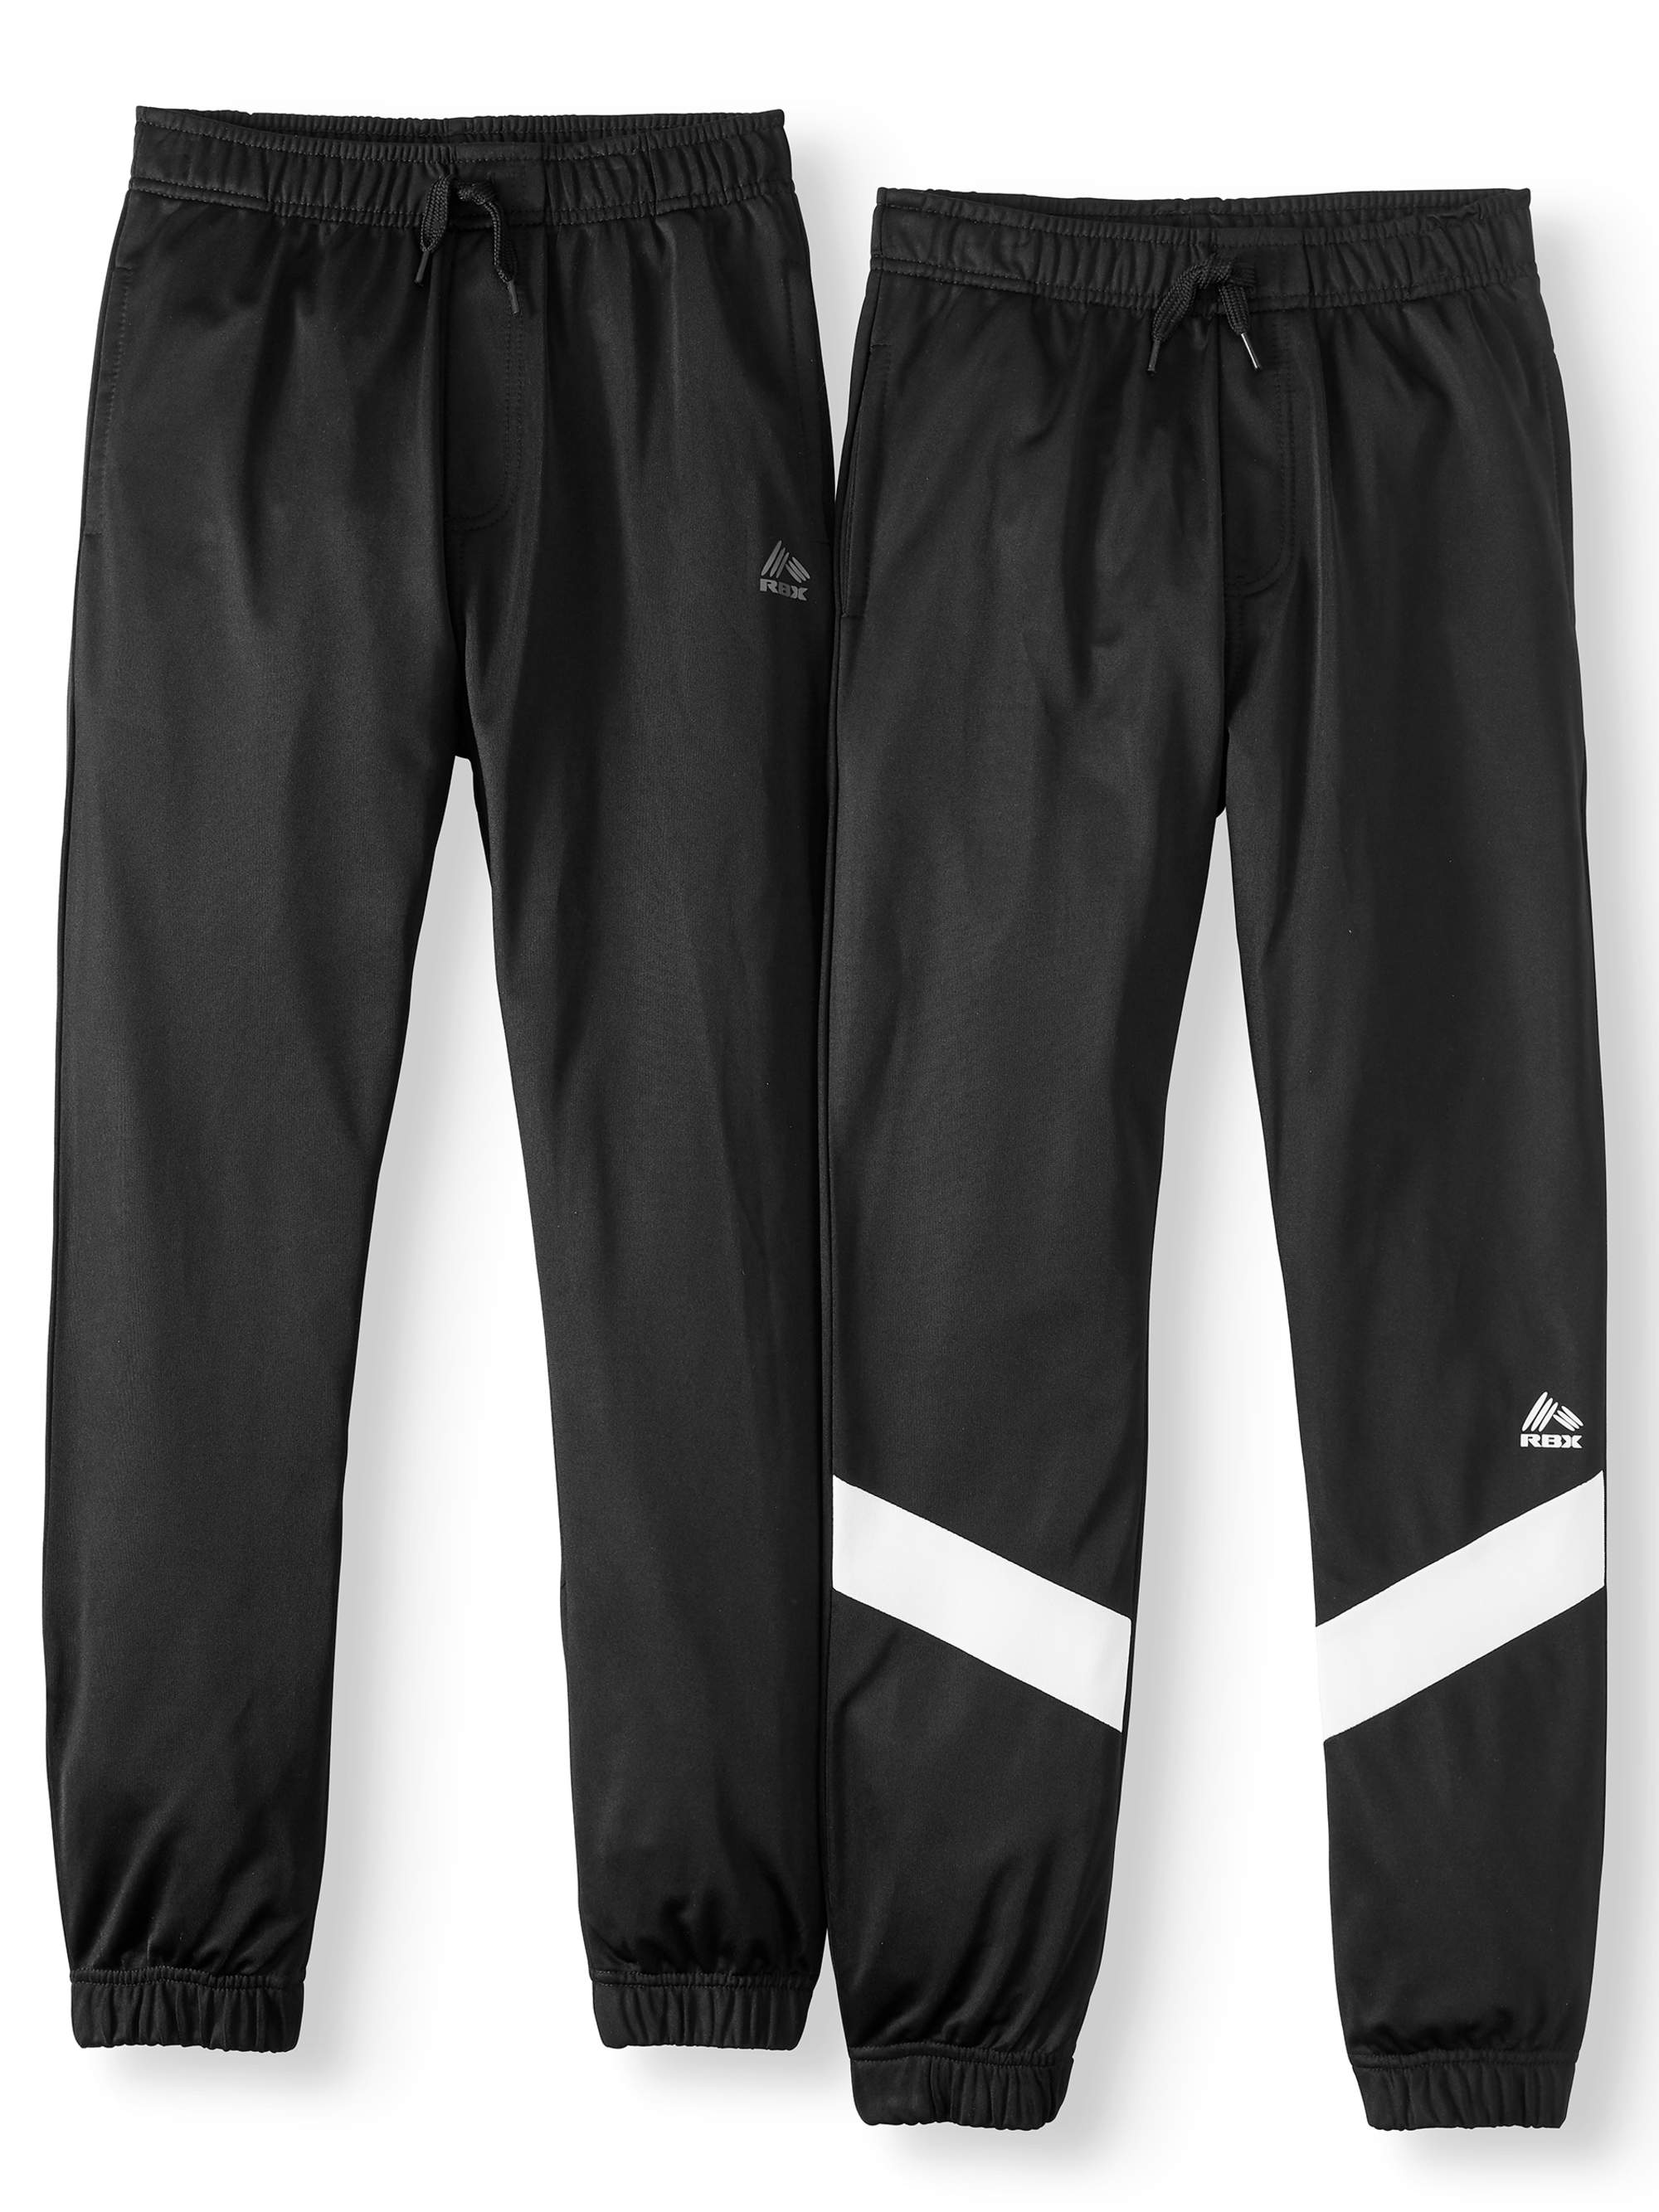 RBX Athletic Tricot Jogger Pants, 2-Pack (Little Boys & Big Boys) - image 1 of 2